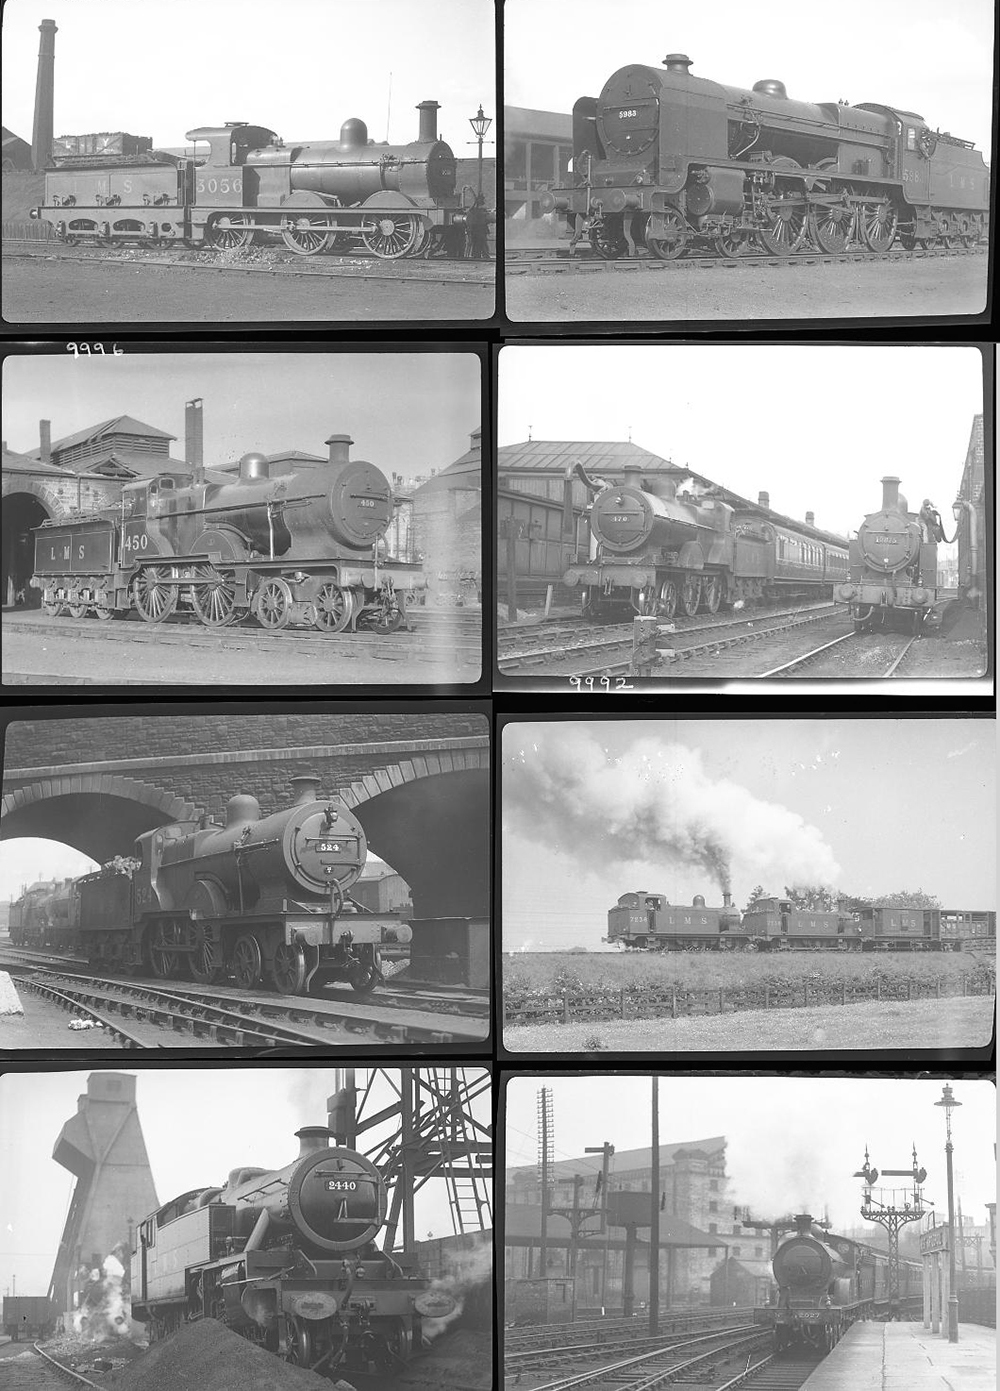 Approximately 110 medium format negatives. Mostly LMS, some LNER, a couple of EHLR and M&GN taken in